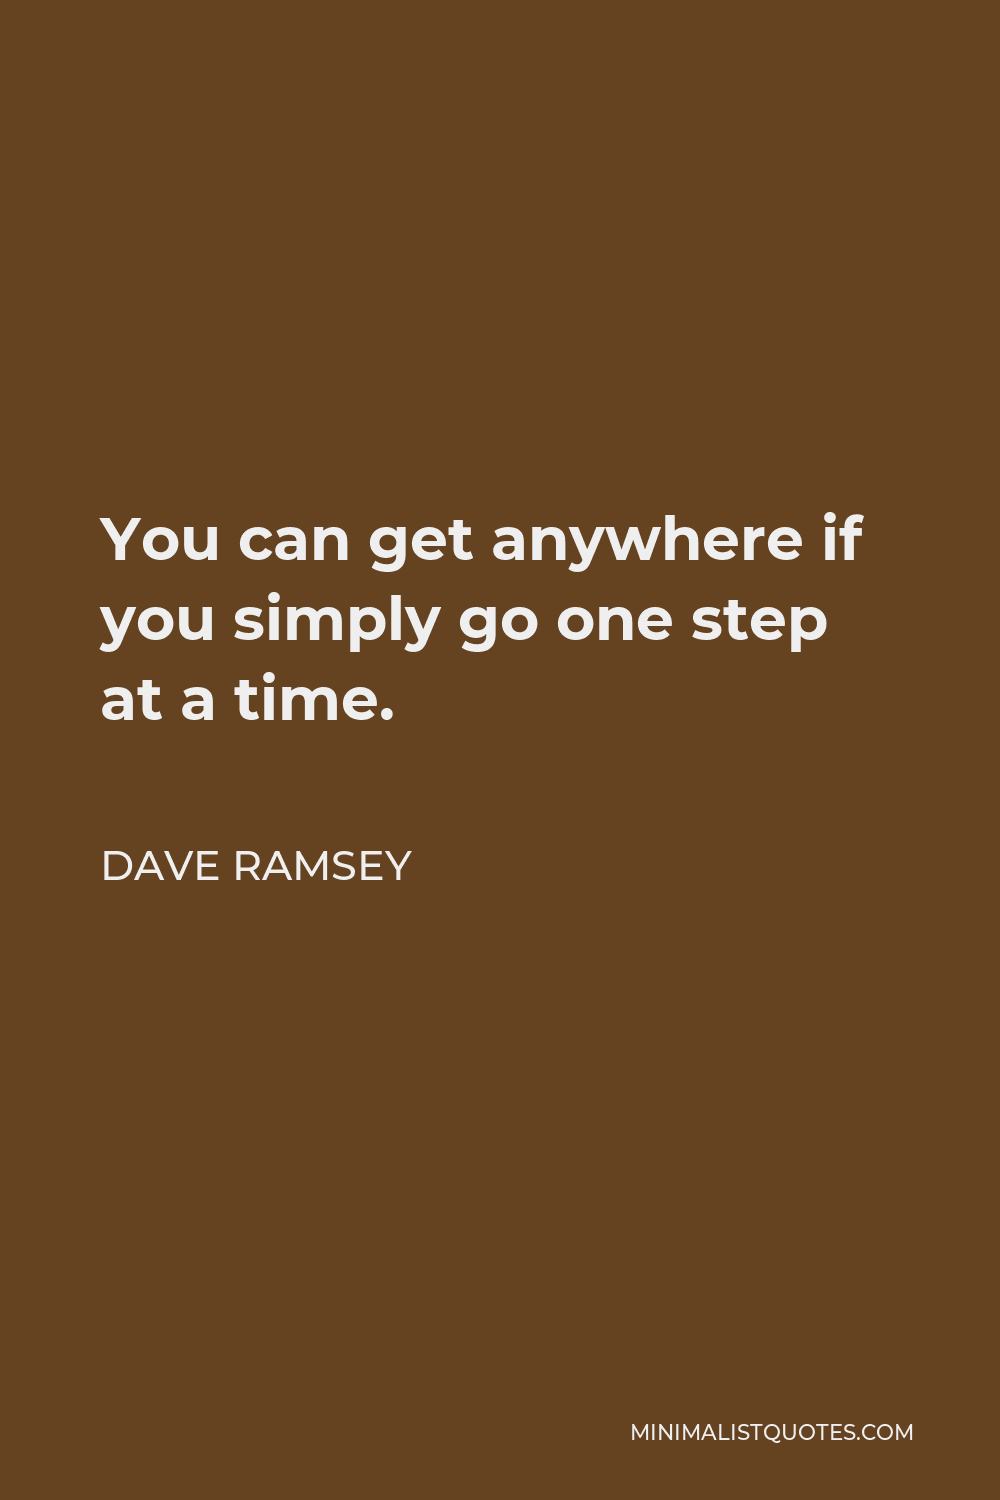 Dave Ramsey Quote - You can get anywhere if you simply go one step at a time.